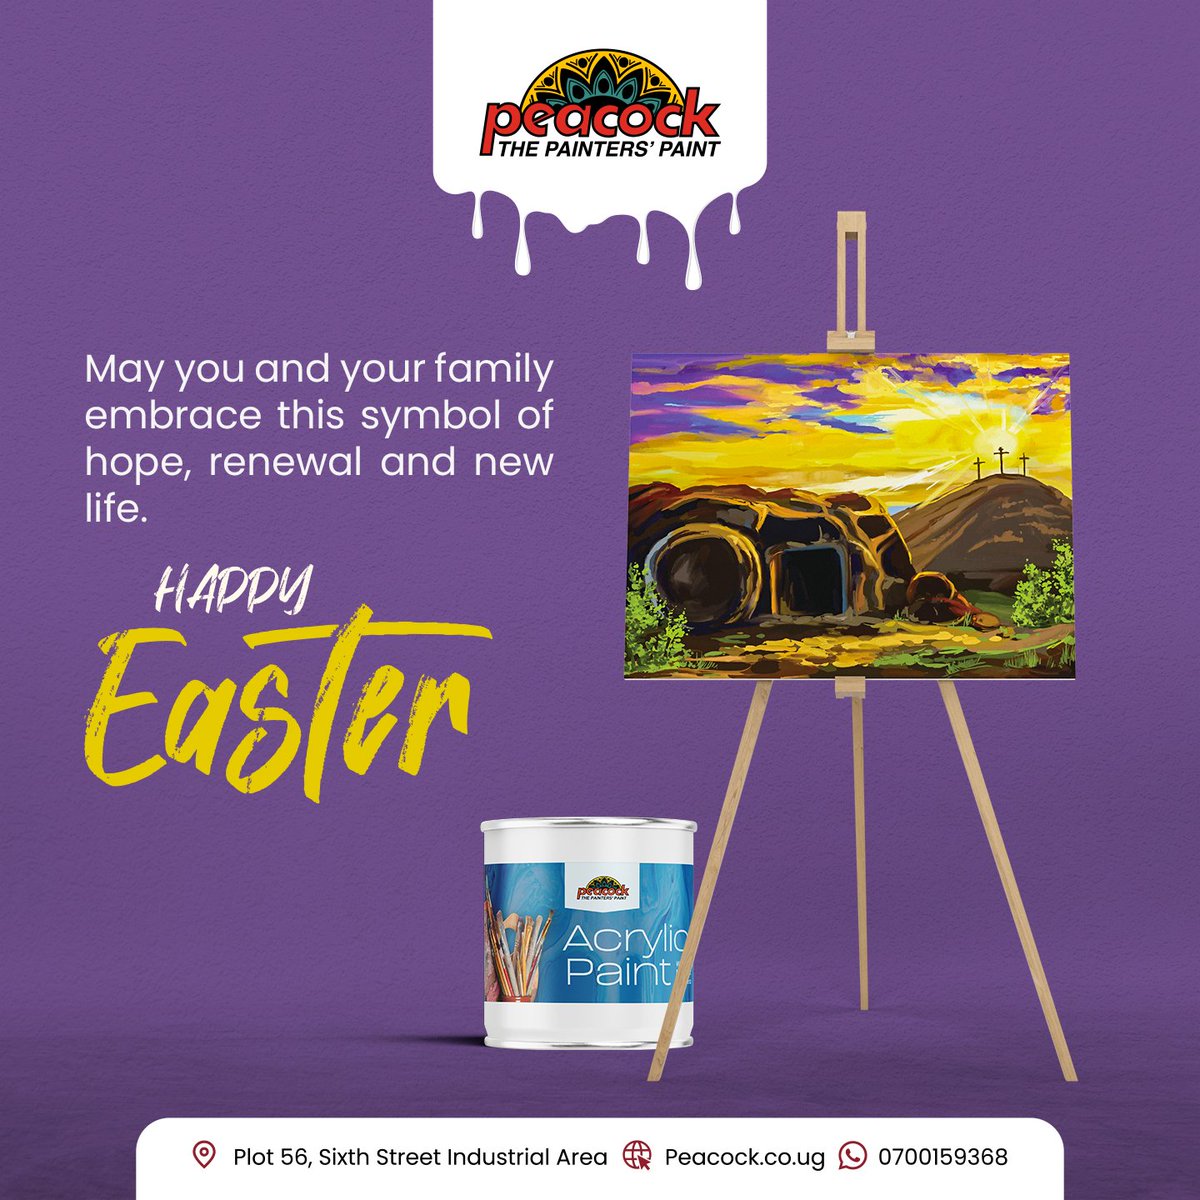 To our Peacock family and customers, have a blessed Easter Sunday. 🤗
#HappyEaster
#PeacockPaints #ThePaintersPaint